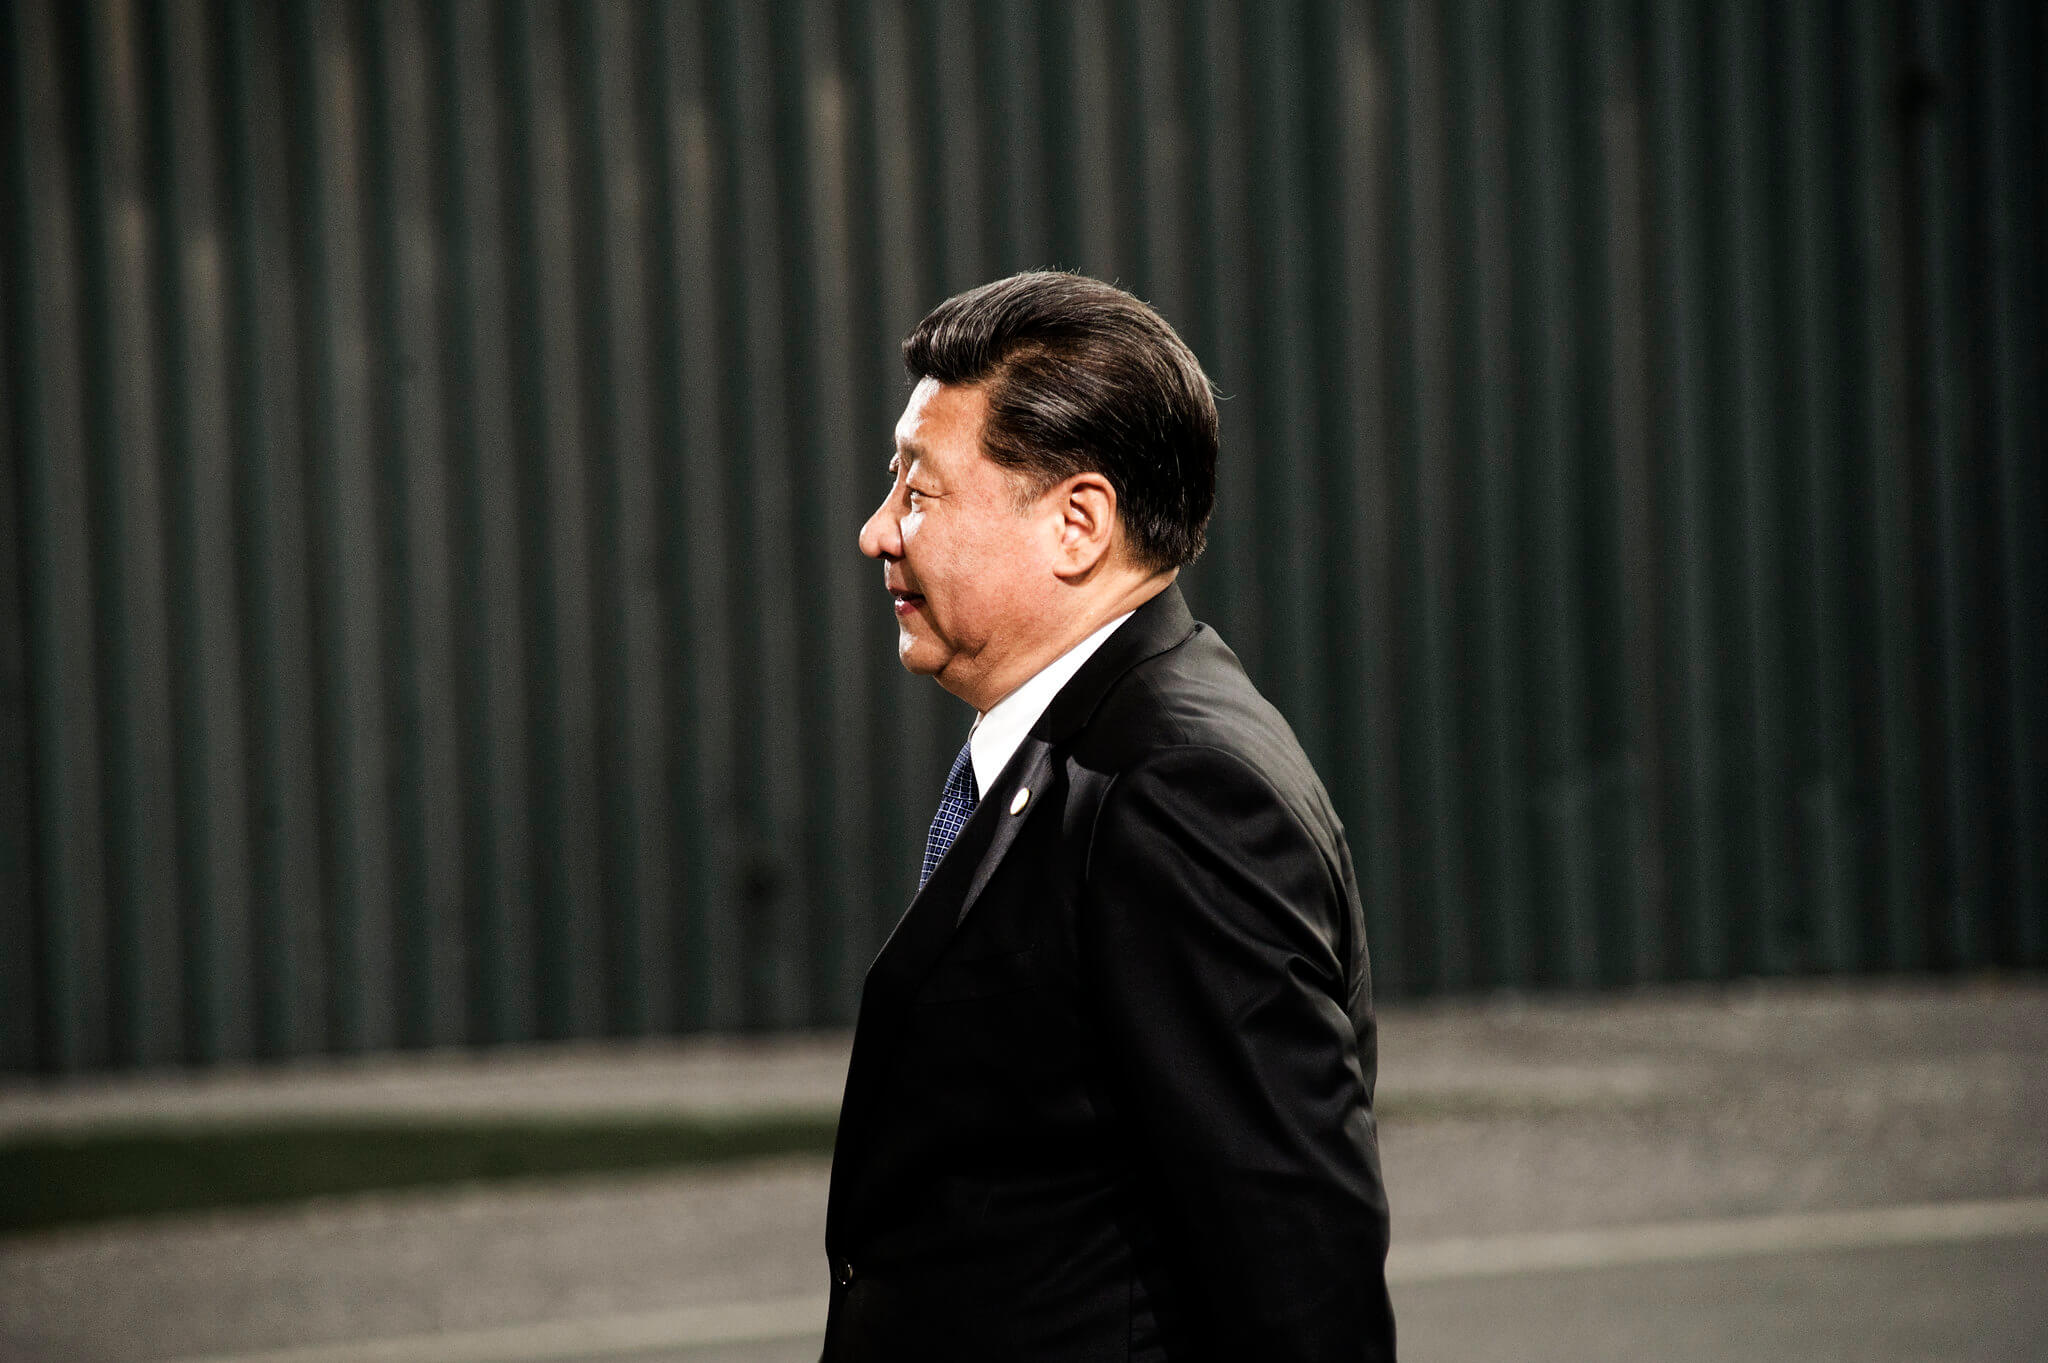 Chinese president Xi Jinping arrives at a meeting in Paris. © COP PARIS/Flickr